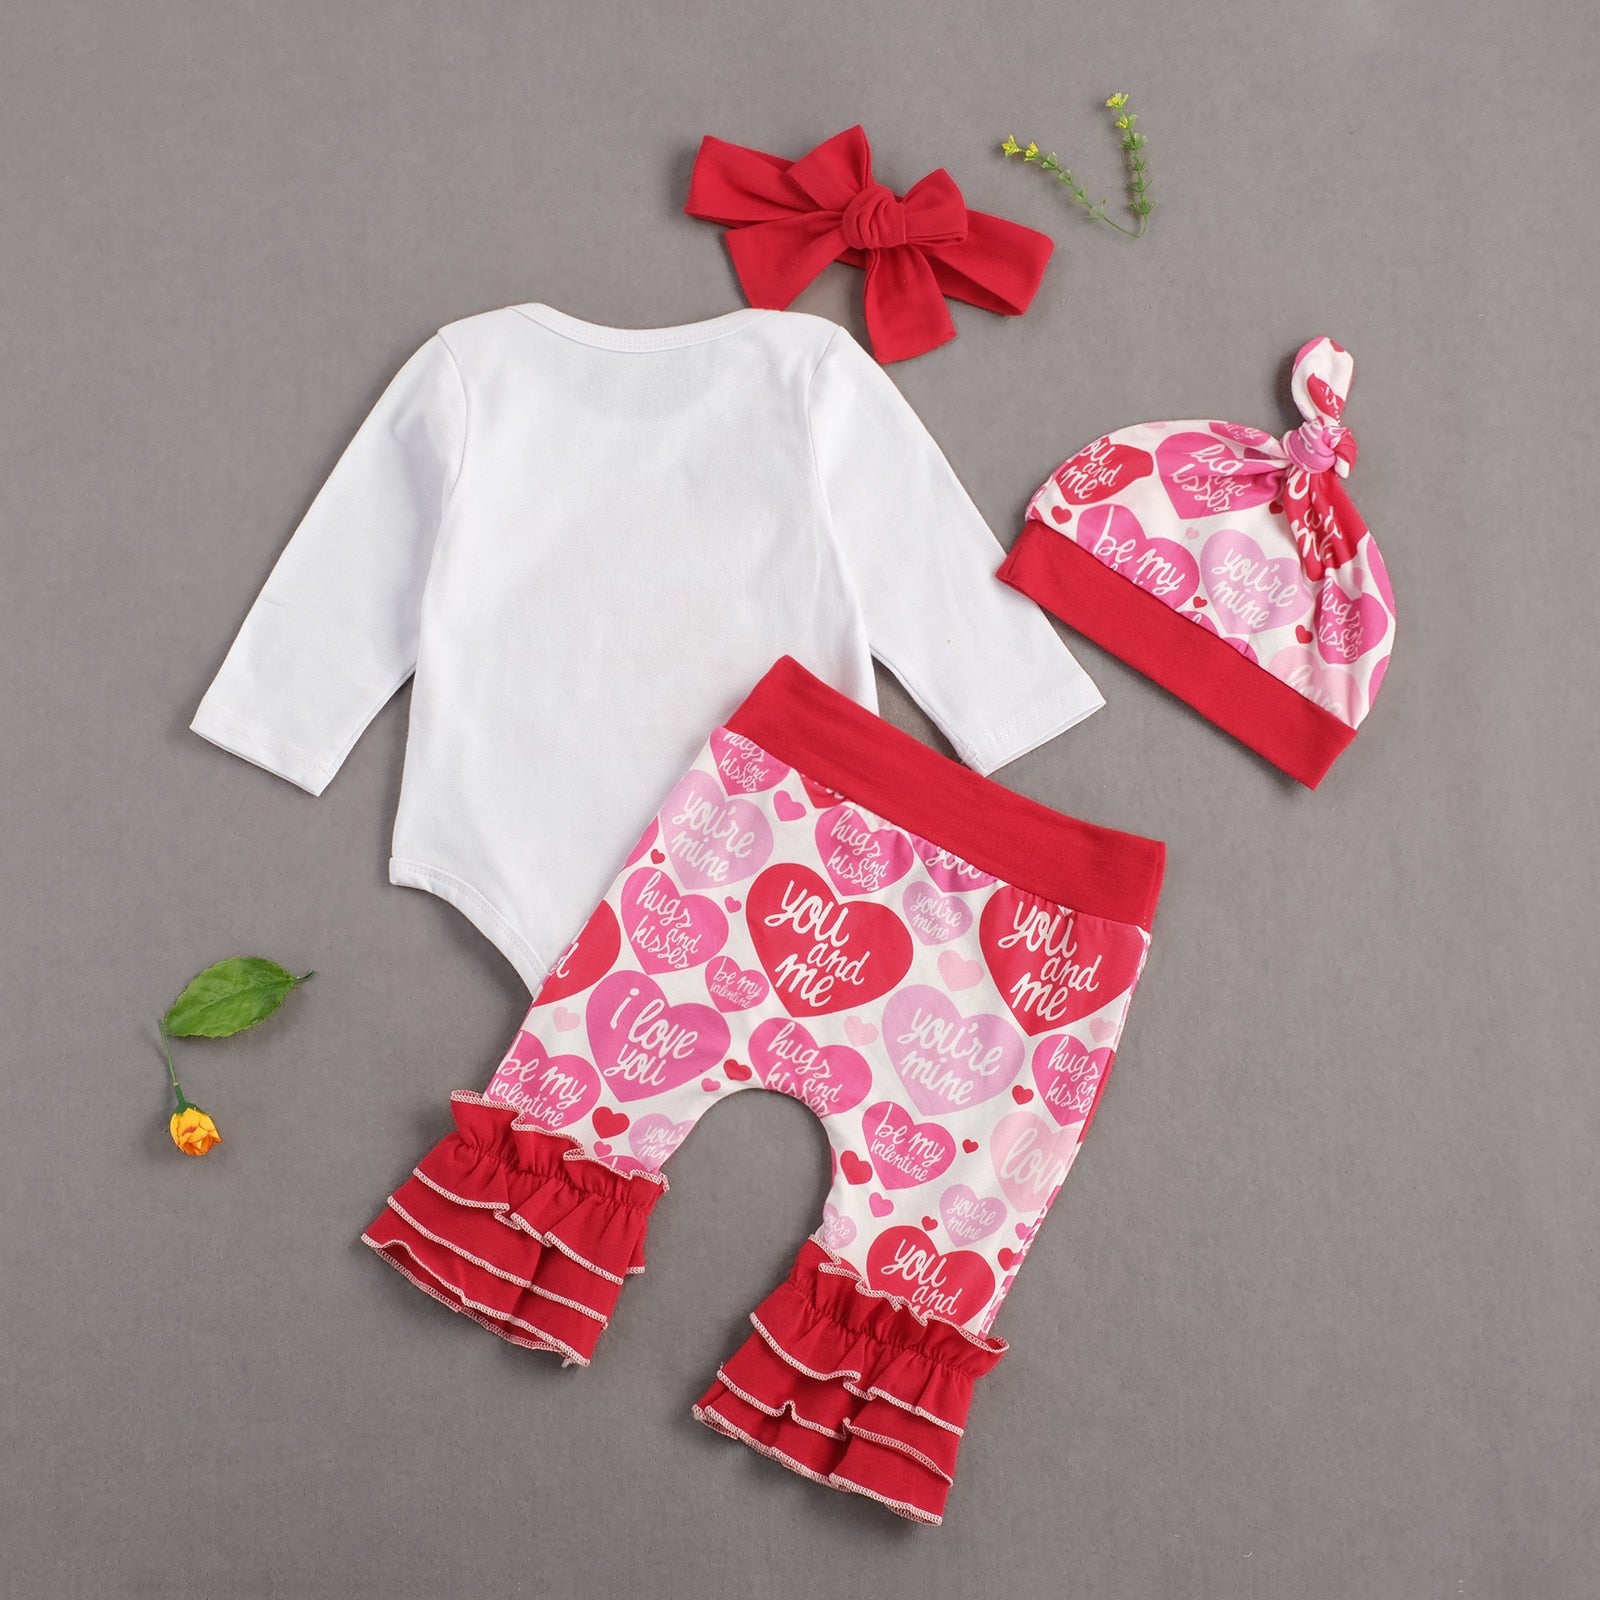 Newborn Baby Girls My First Valentine Day 4pcs Ruffle Bow Tie Outfits Set